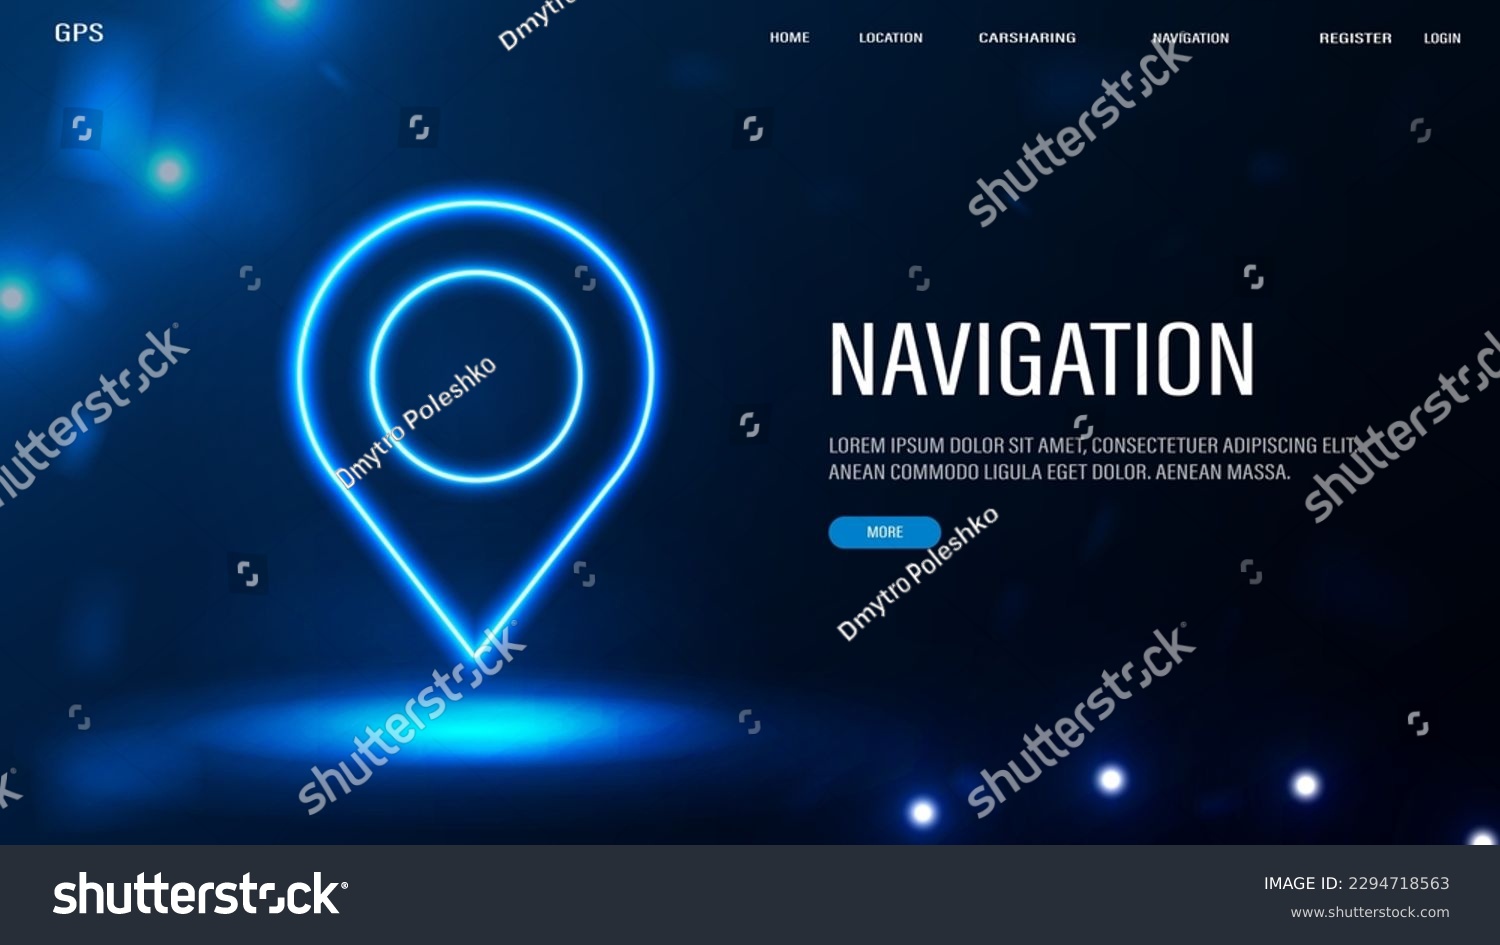 A web banner with a neon GPS location pin on a blue background. #2294718563